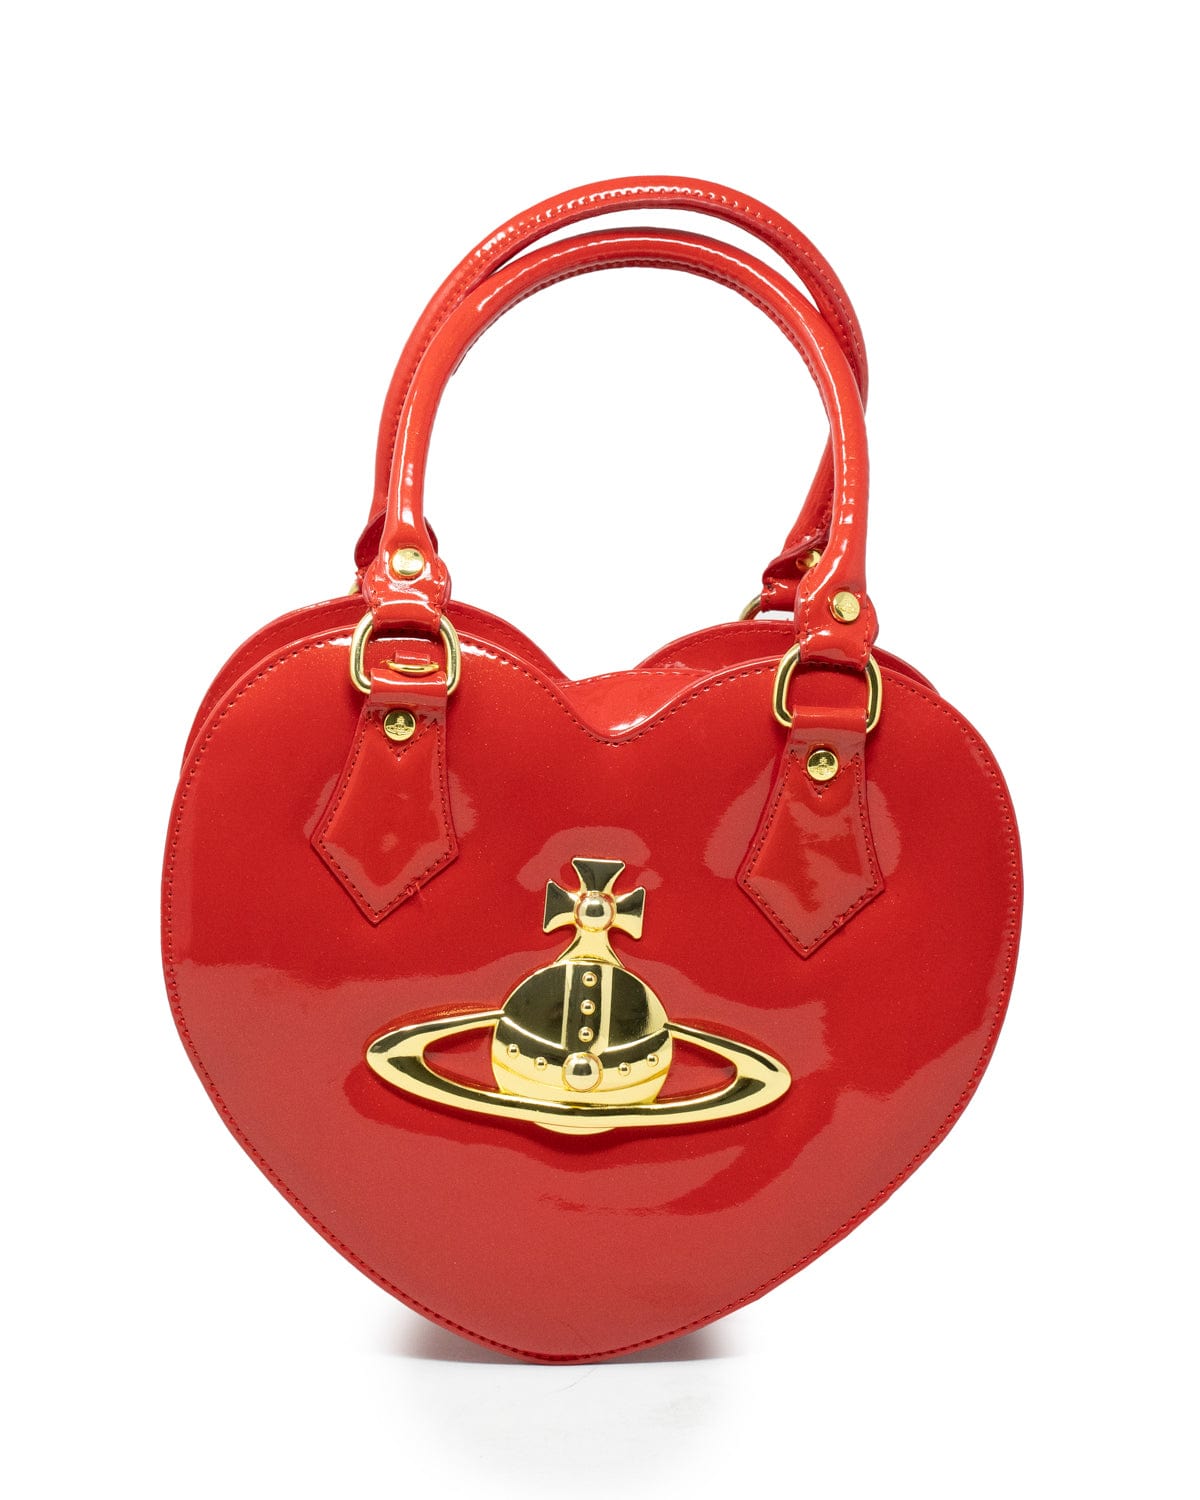 Vivienne Westwood Red Patent Leather Loveheart Bag GHW - AGL1889 –  LuxuryPromise